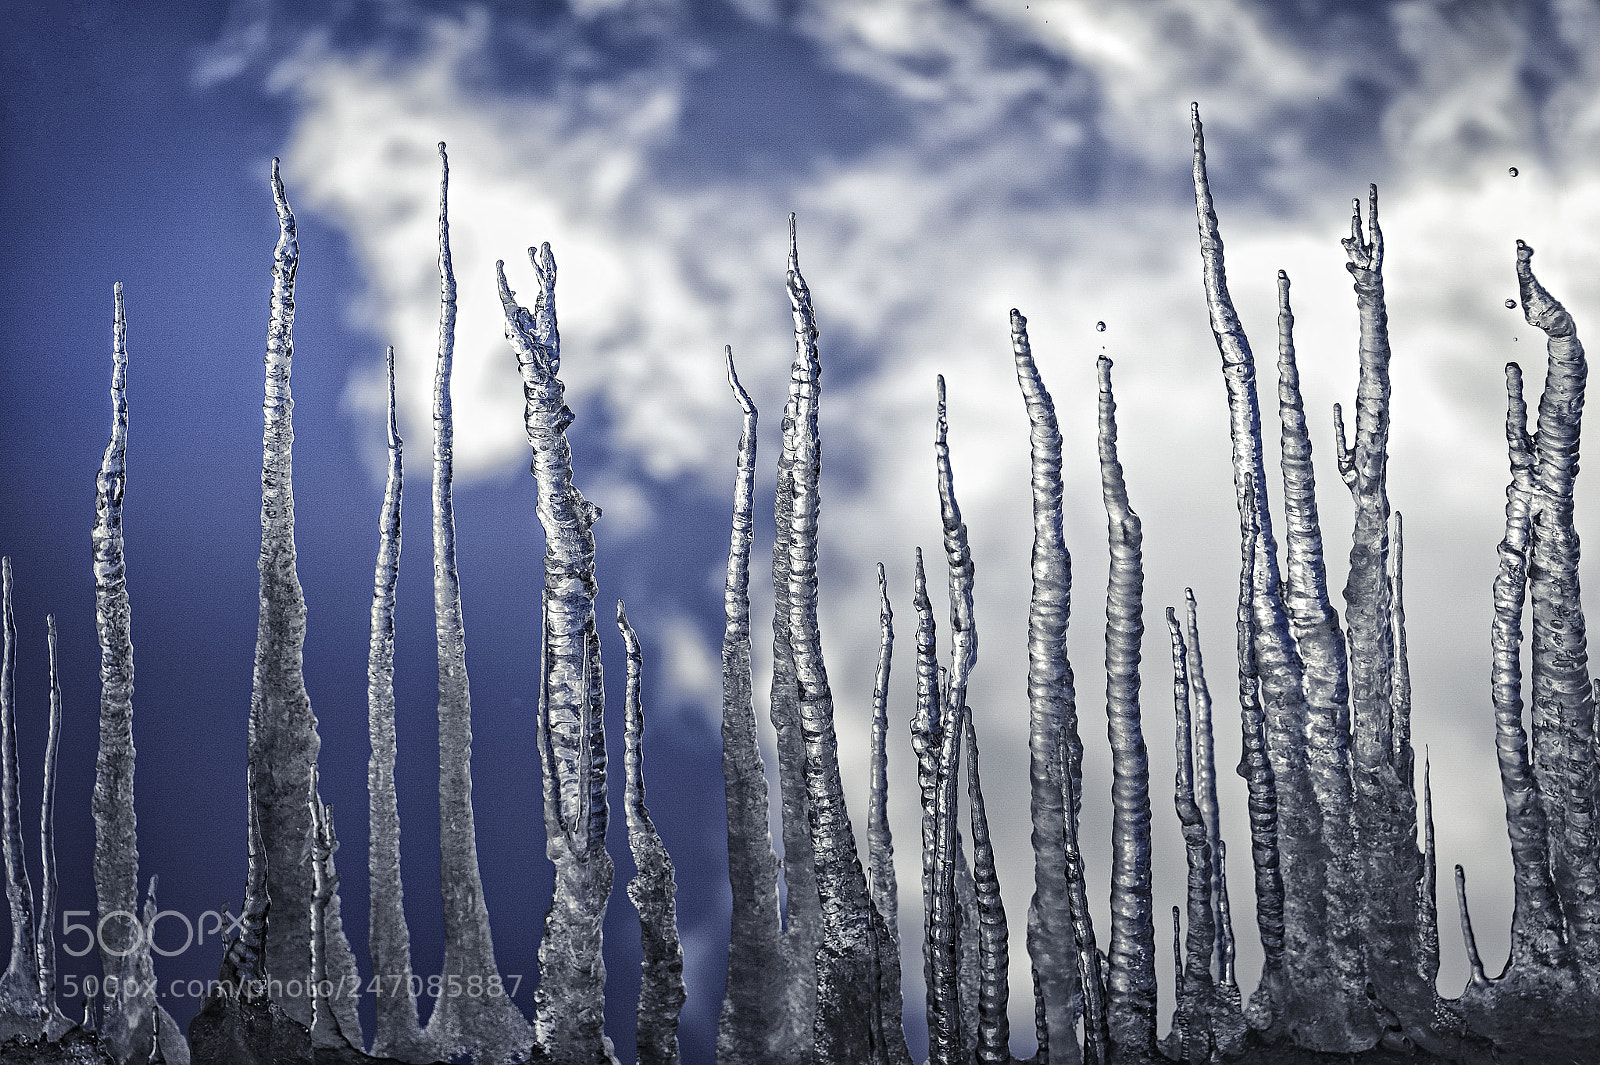 Nikon D4 sample photo. My icy forest photography